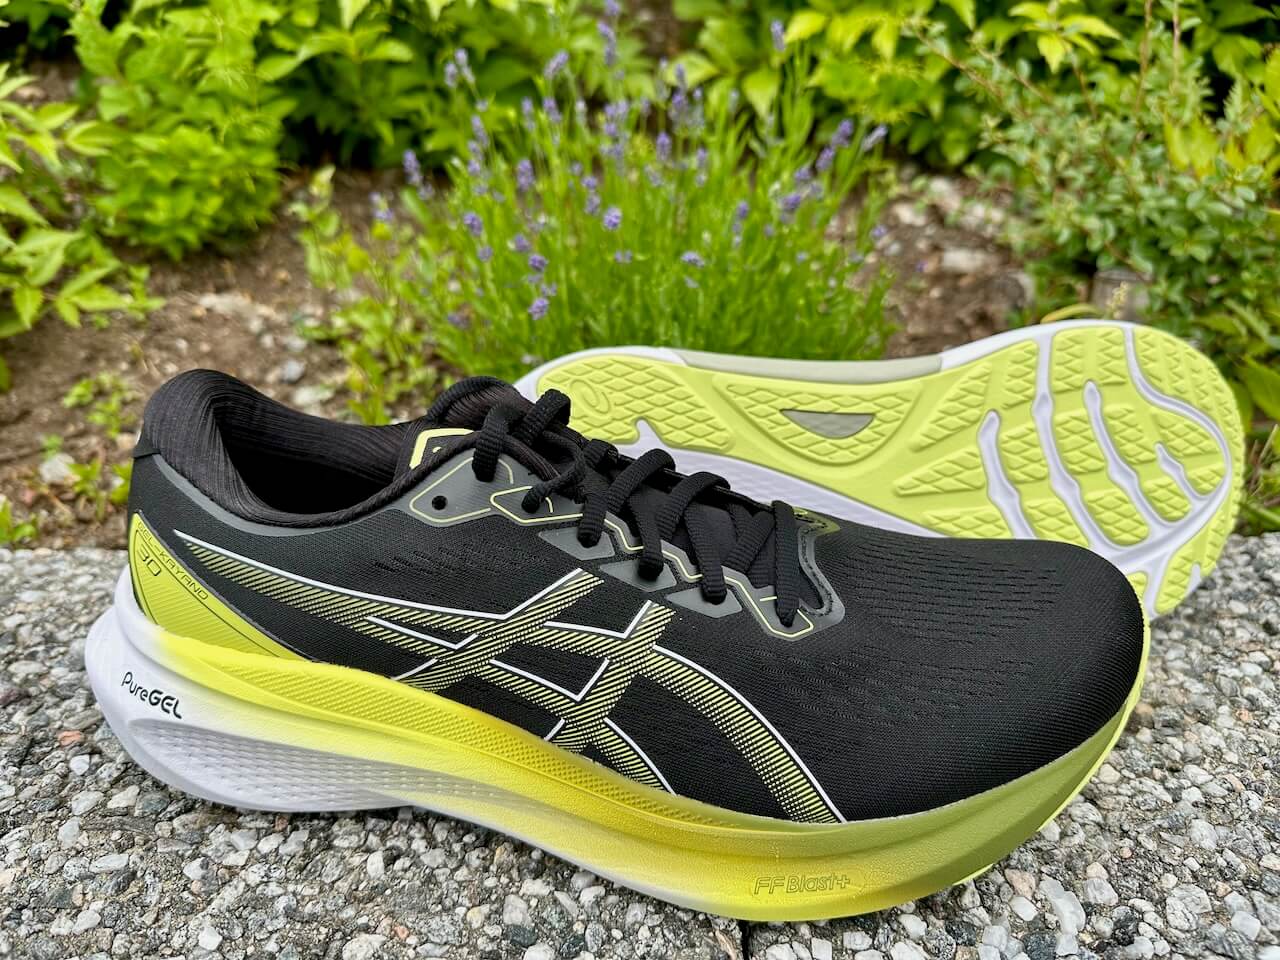 Featured image for “Test: ASICS GEL-Kayano 30”